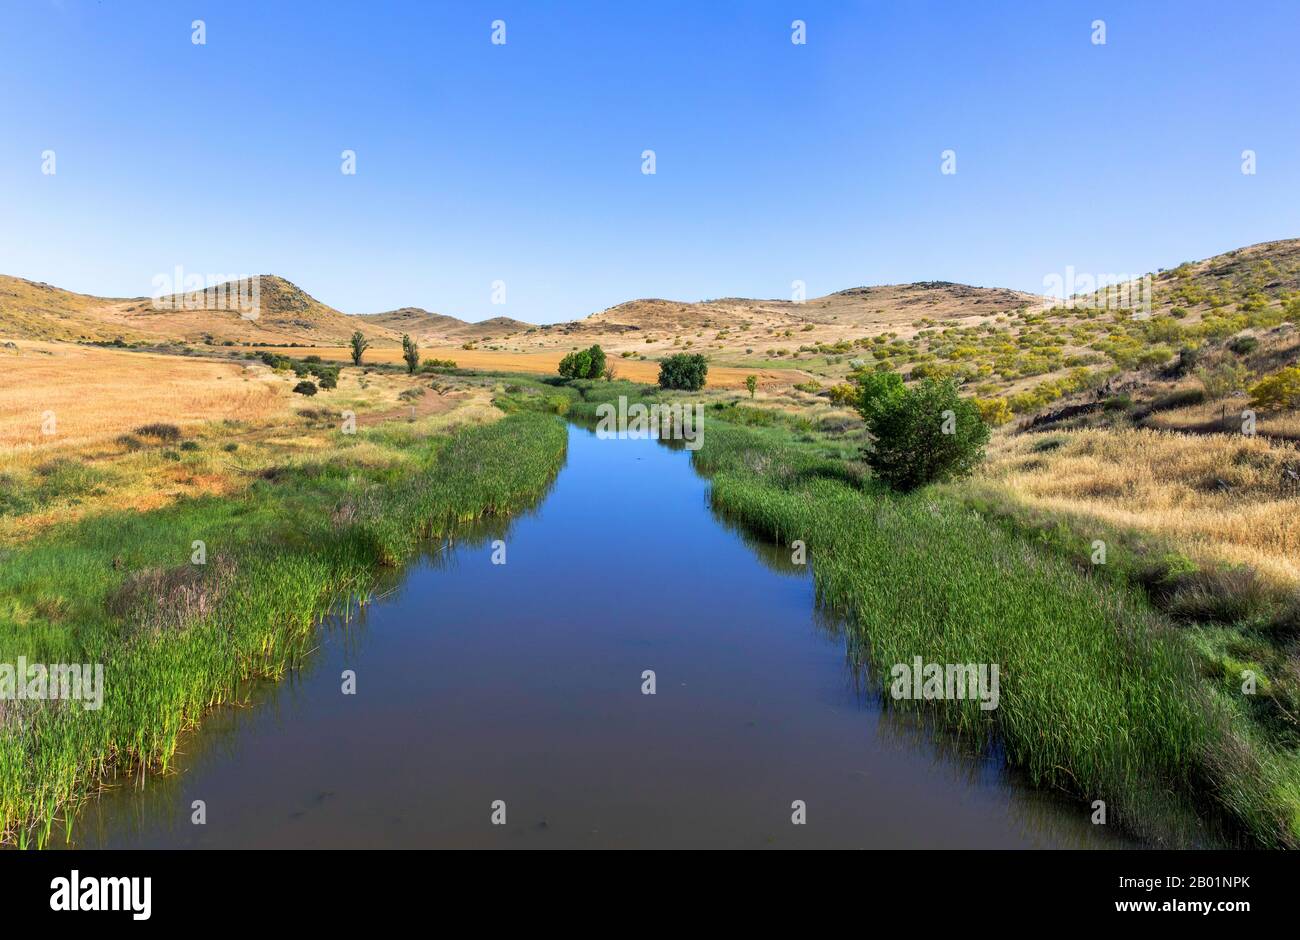 river Guadalefra in southern Spain, Spain, Extremadura, Caceres, Guadalefra Stock Photo